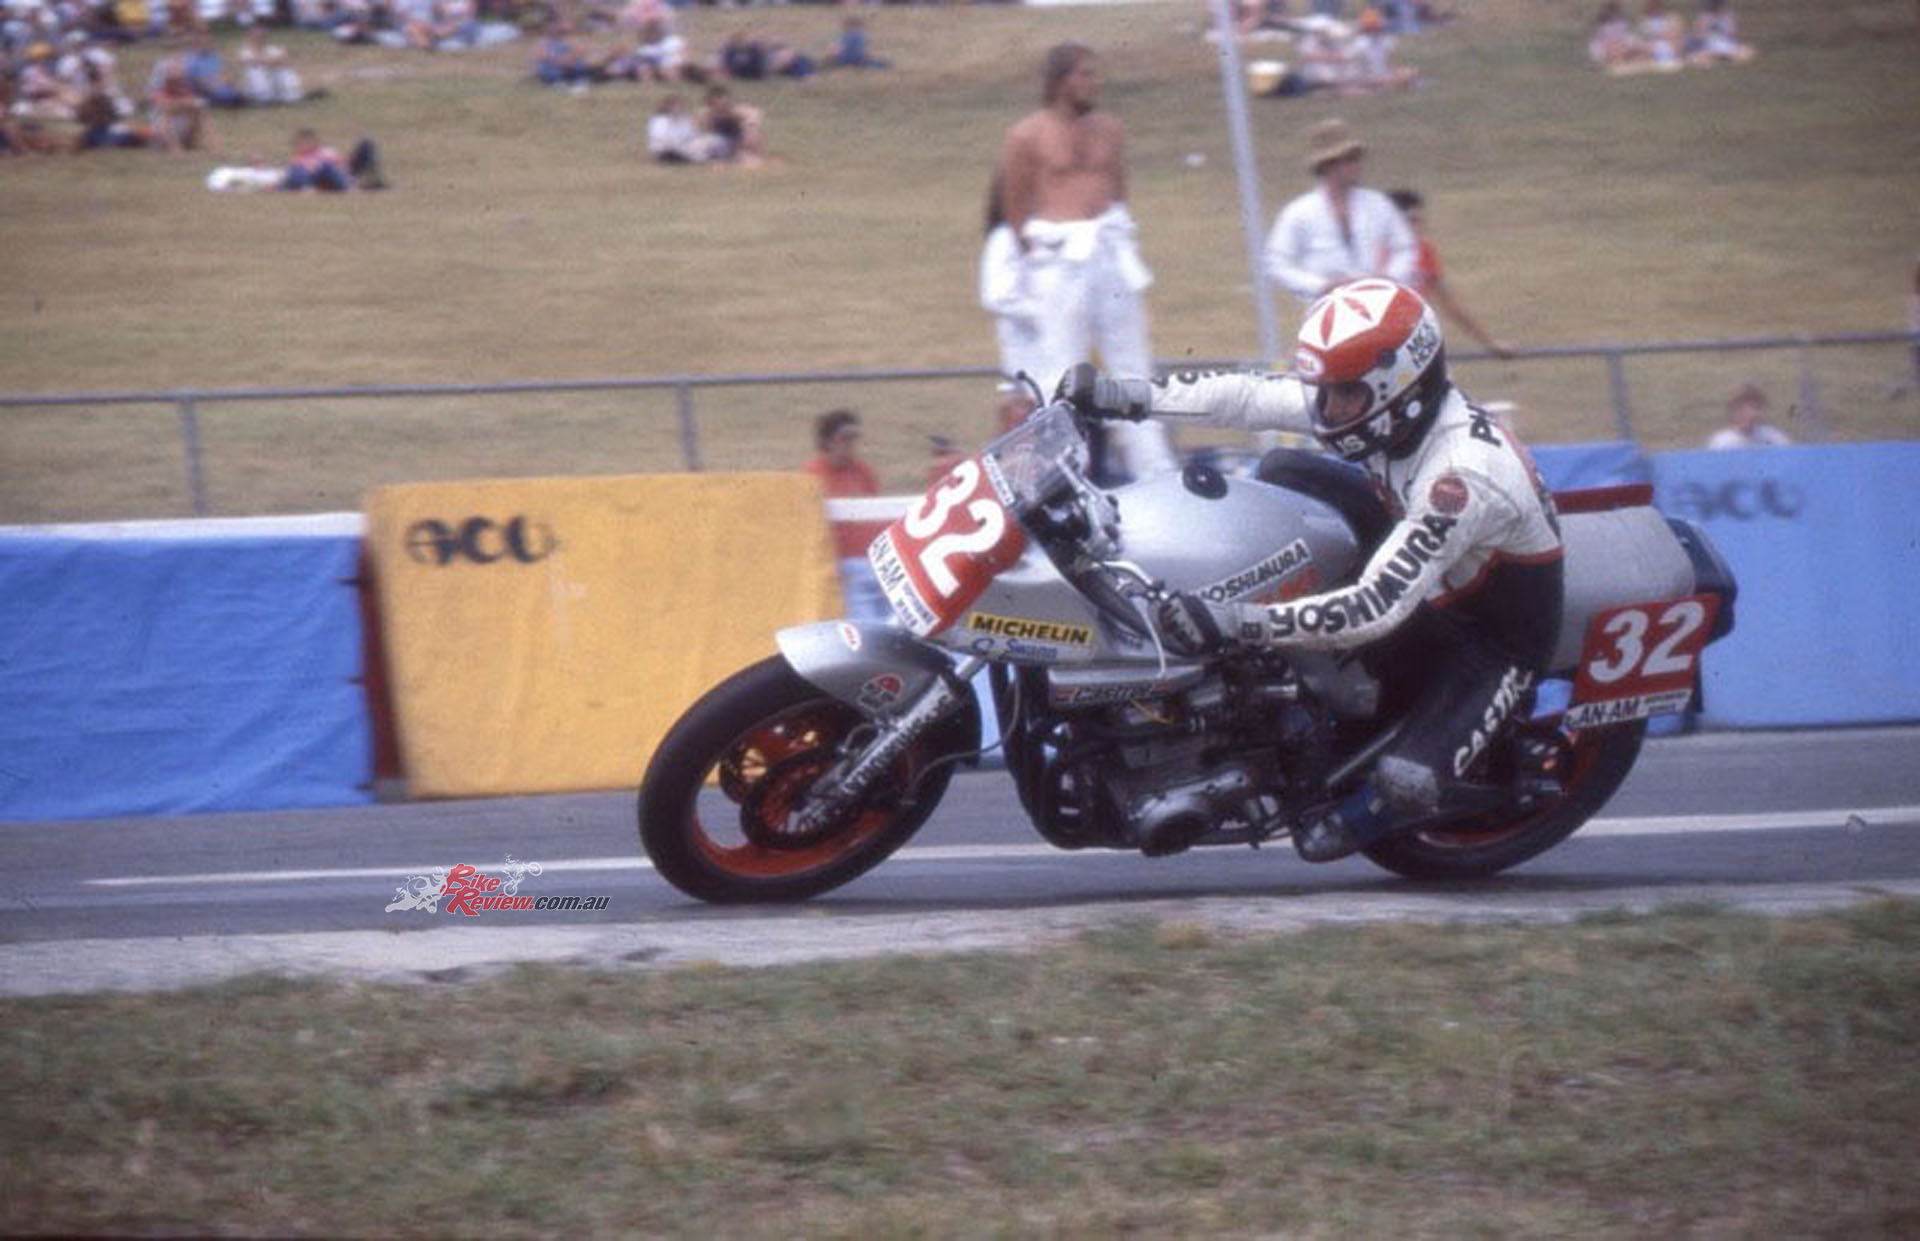 In 1982, the Katana came along, but it was basically the same bike as the GSX1100 except for the bodywork.